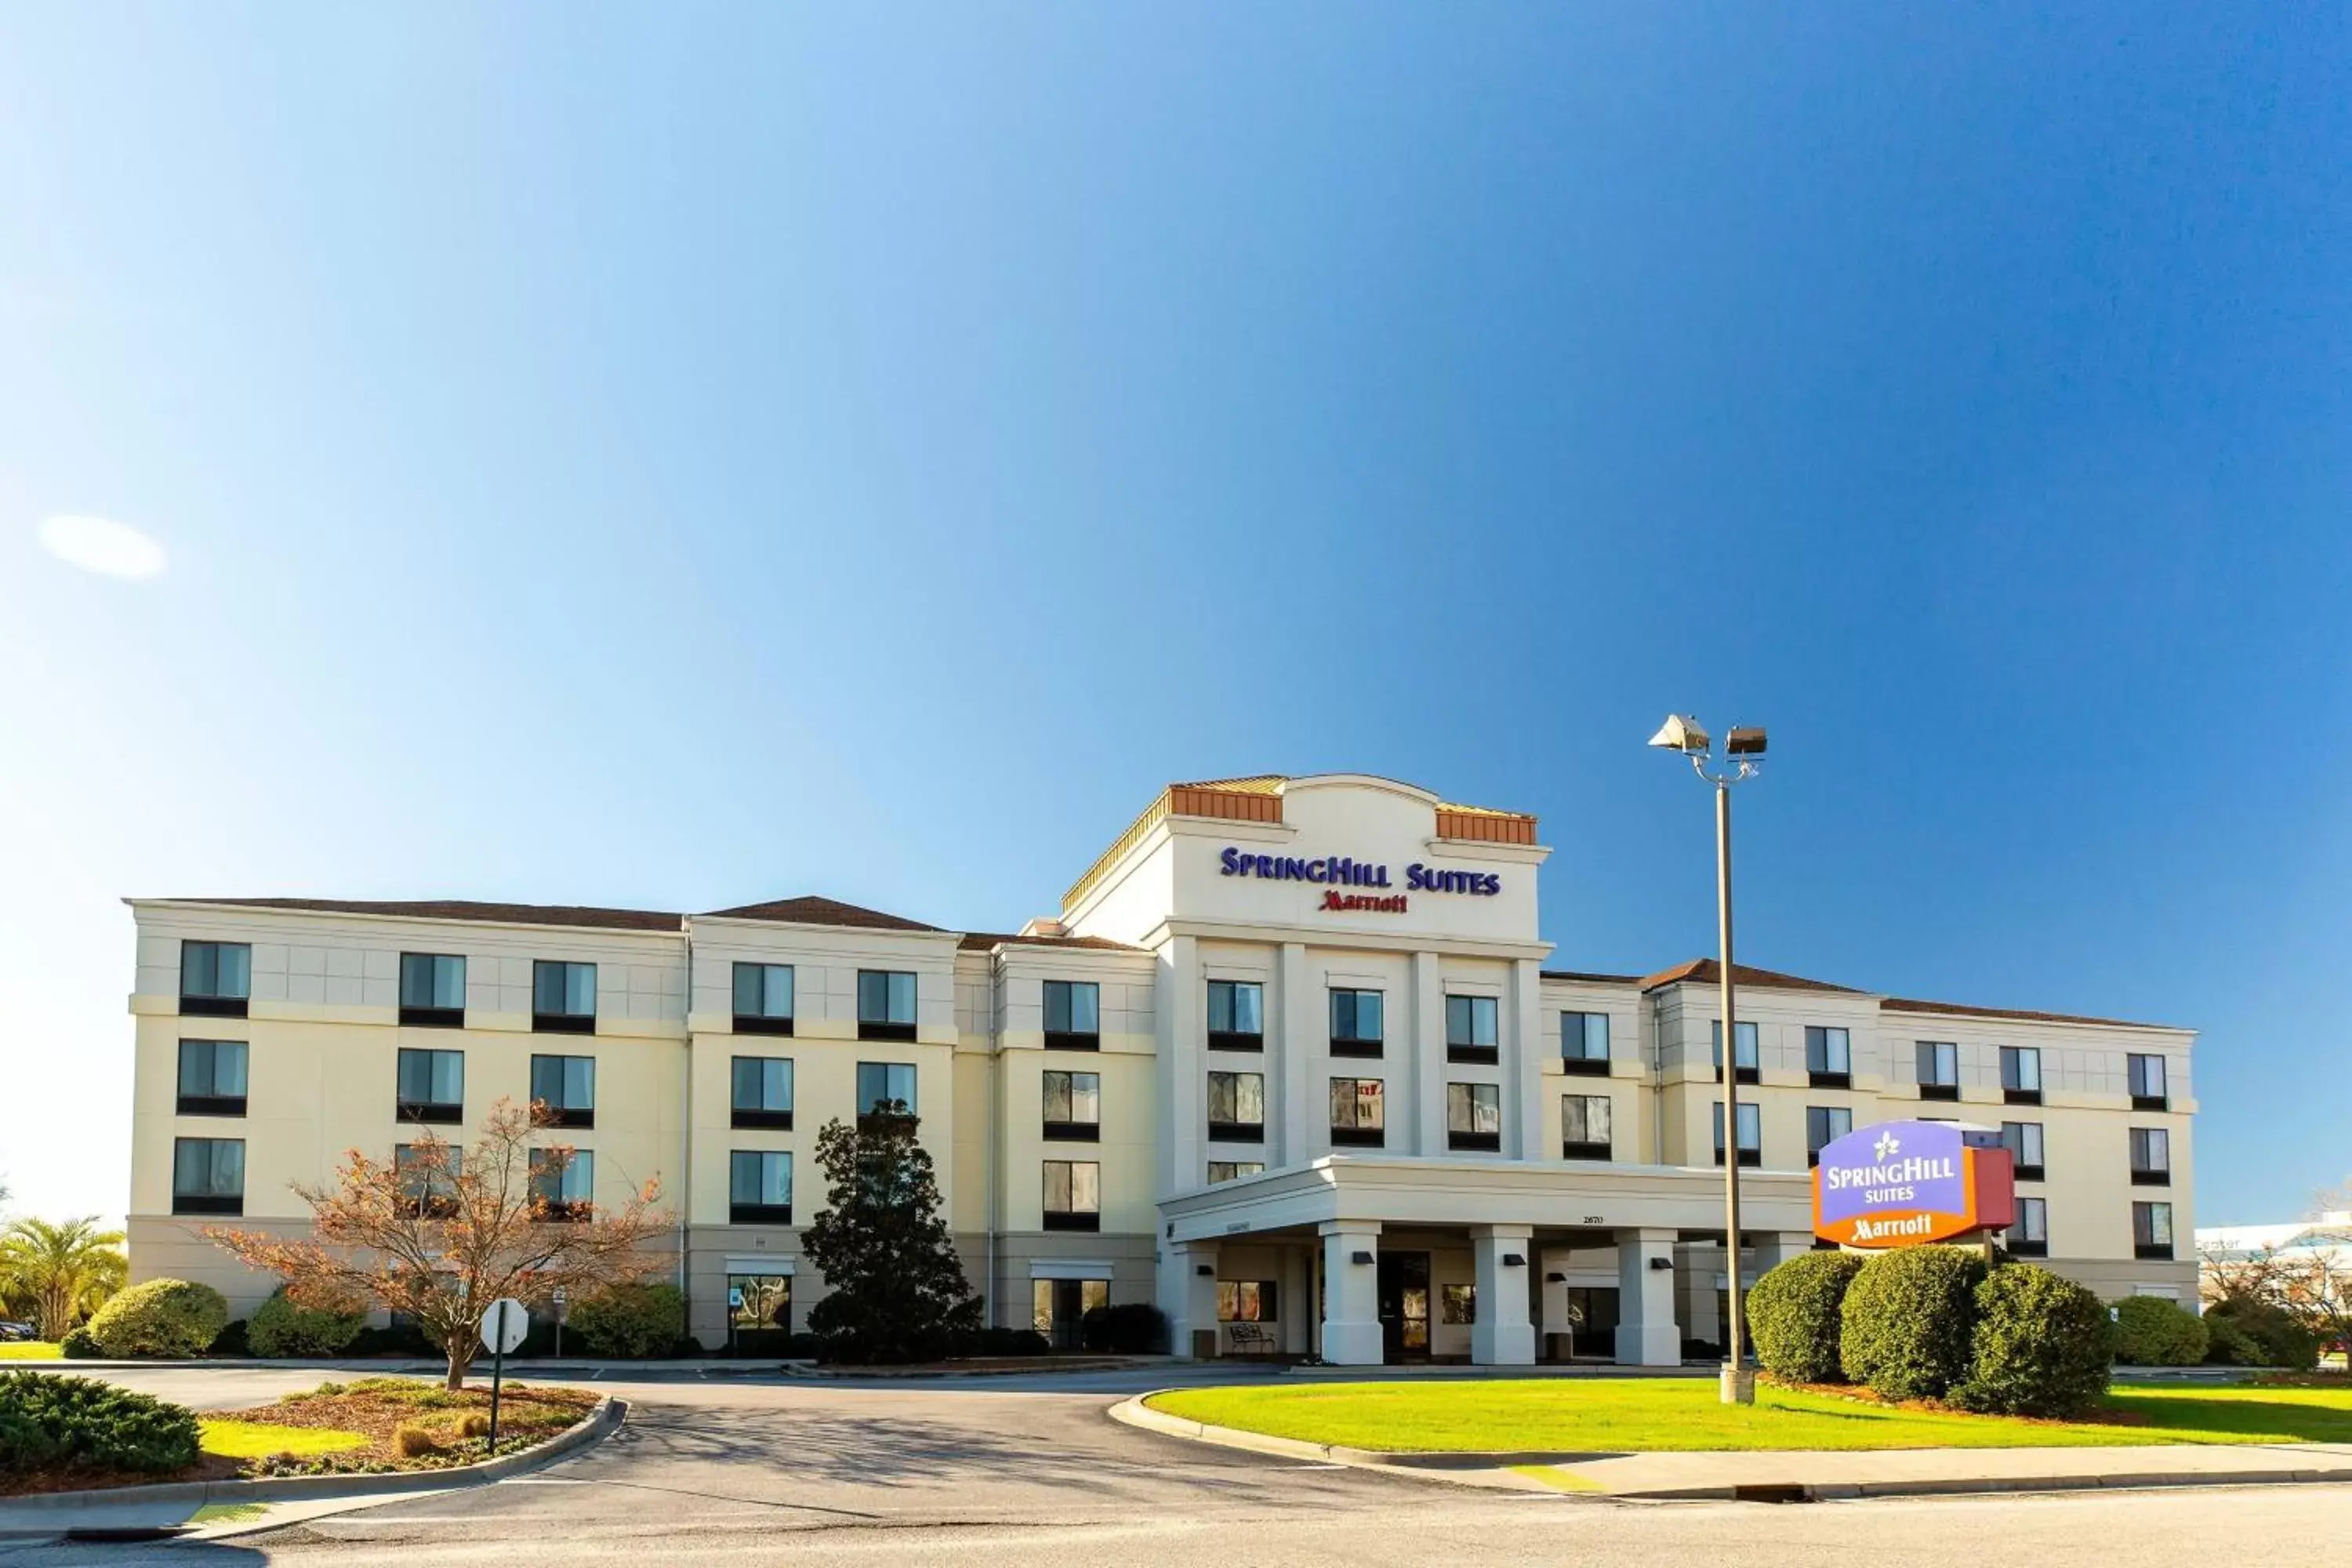 Property Building in SpringHill Suites Florence